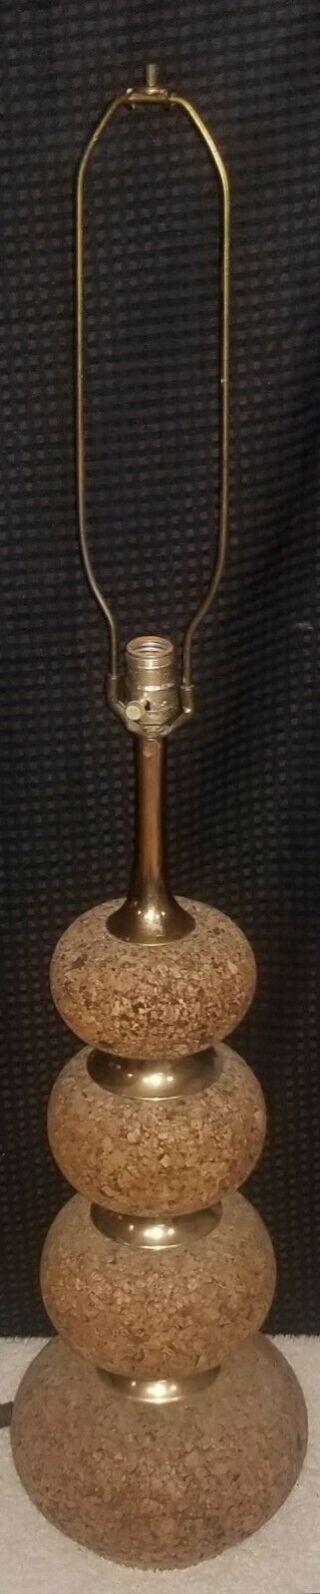 MCM VINTAGE CORK AND BRASS LAMP BY LAUREL LAMP CO.  COND.  44 